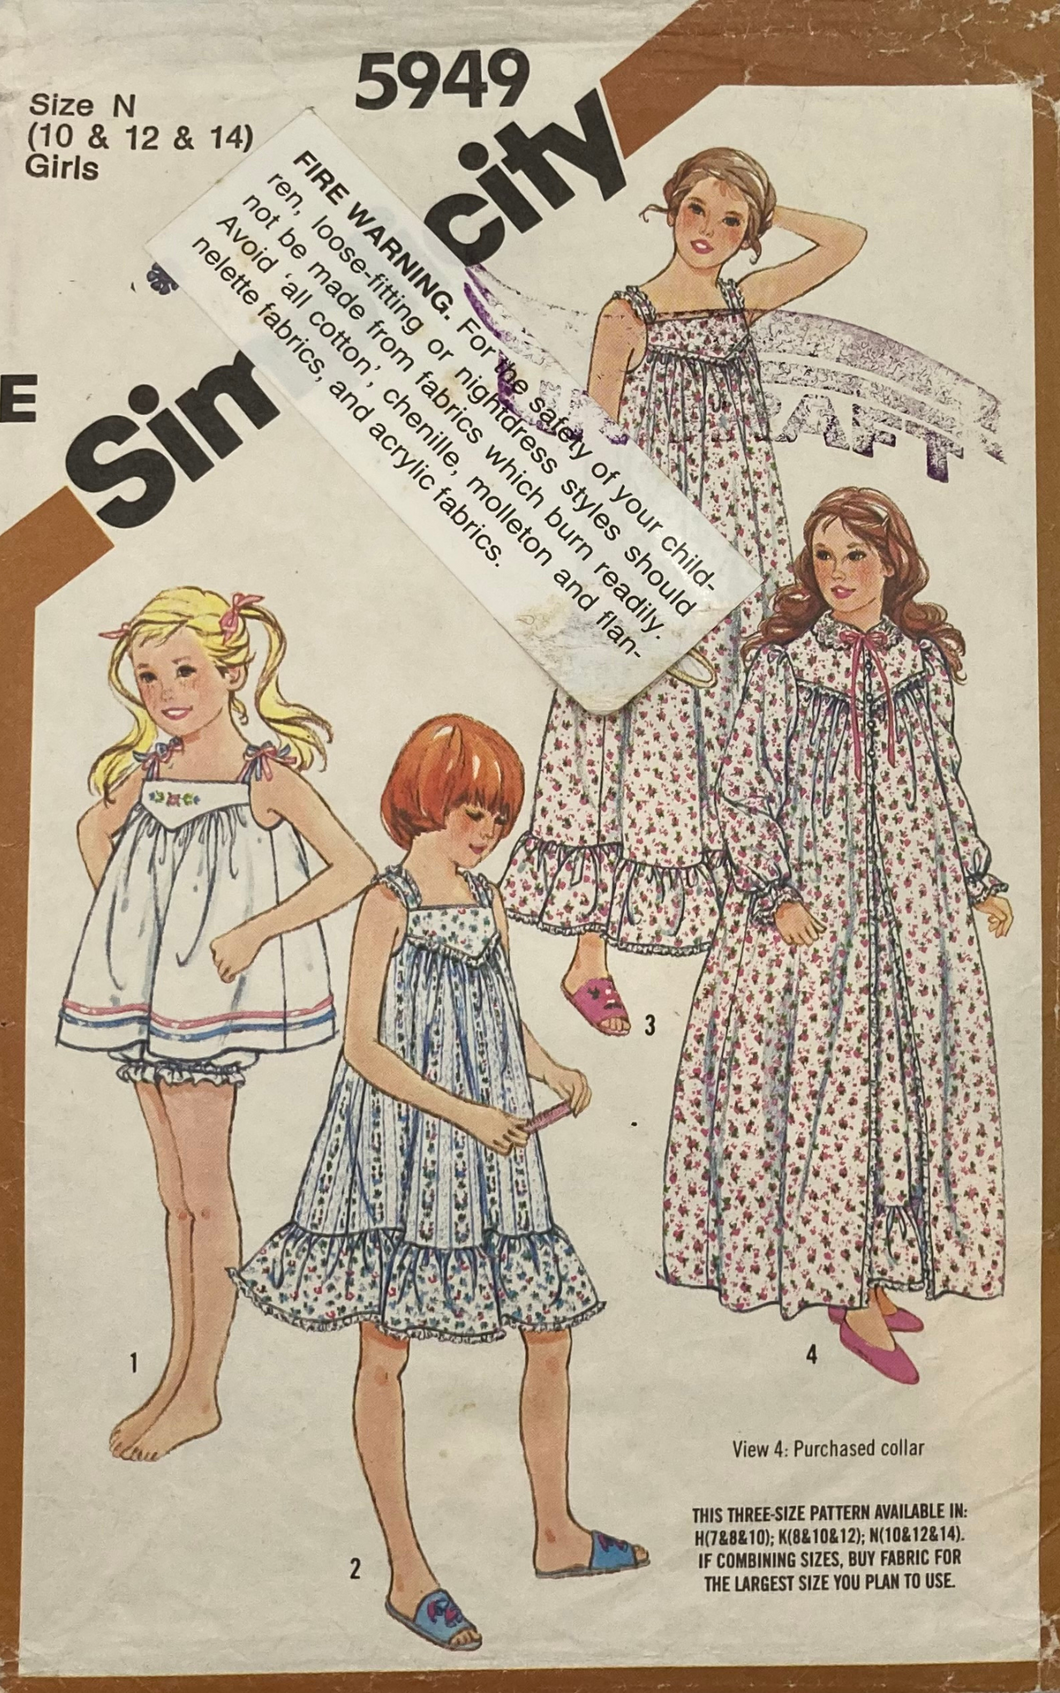 Sewing Pattern: Simplicity 5949